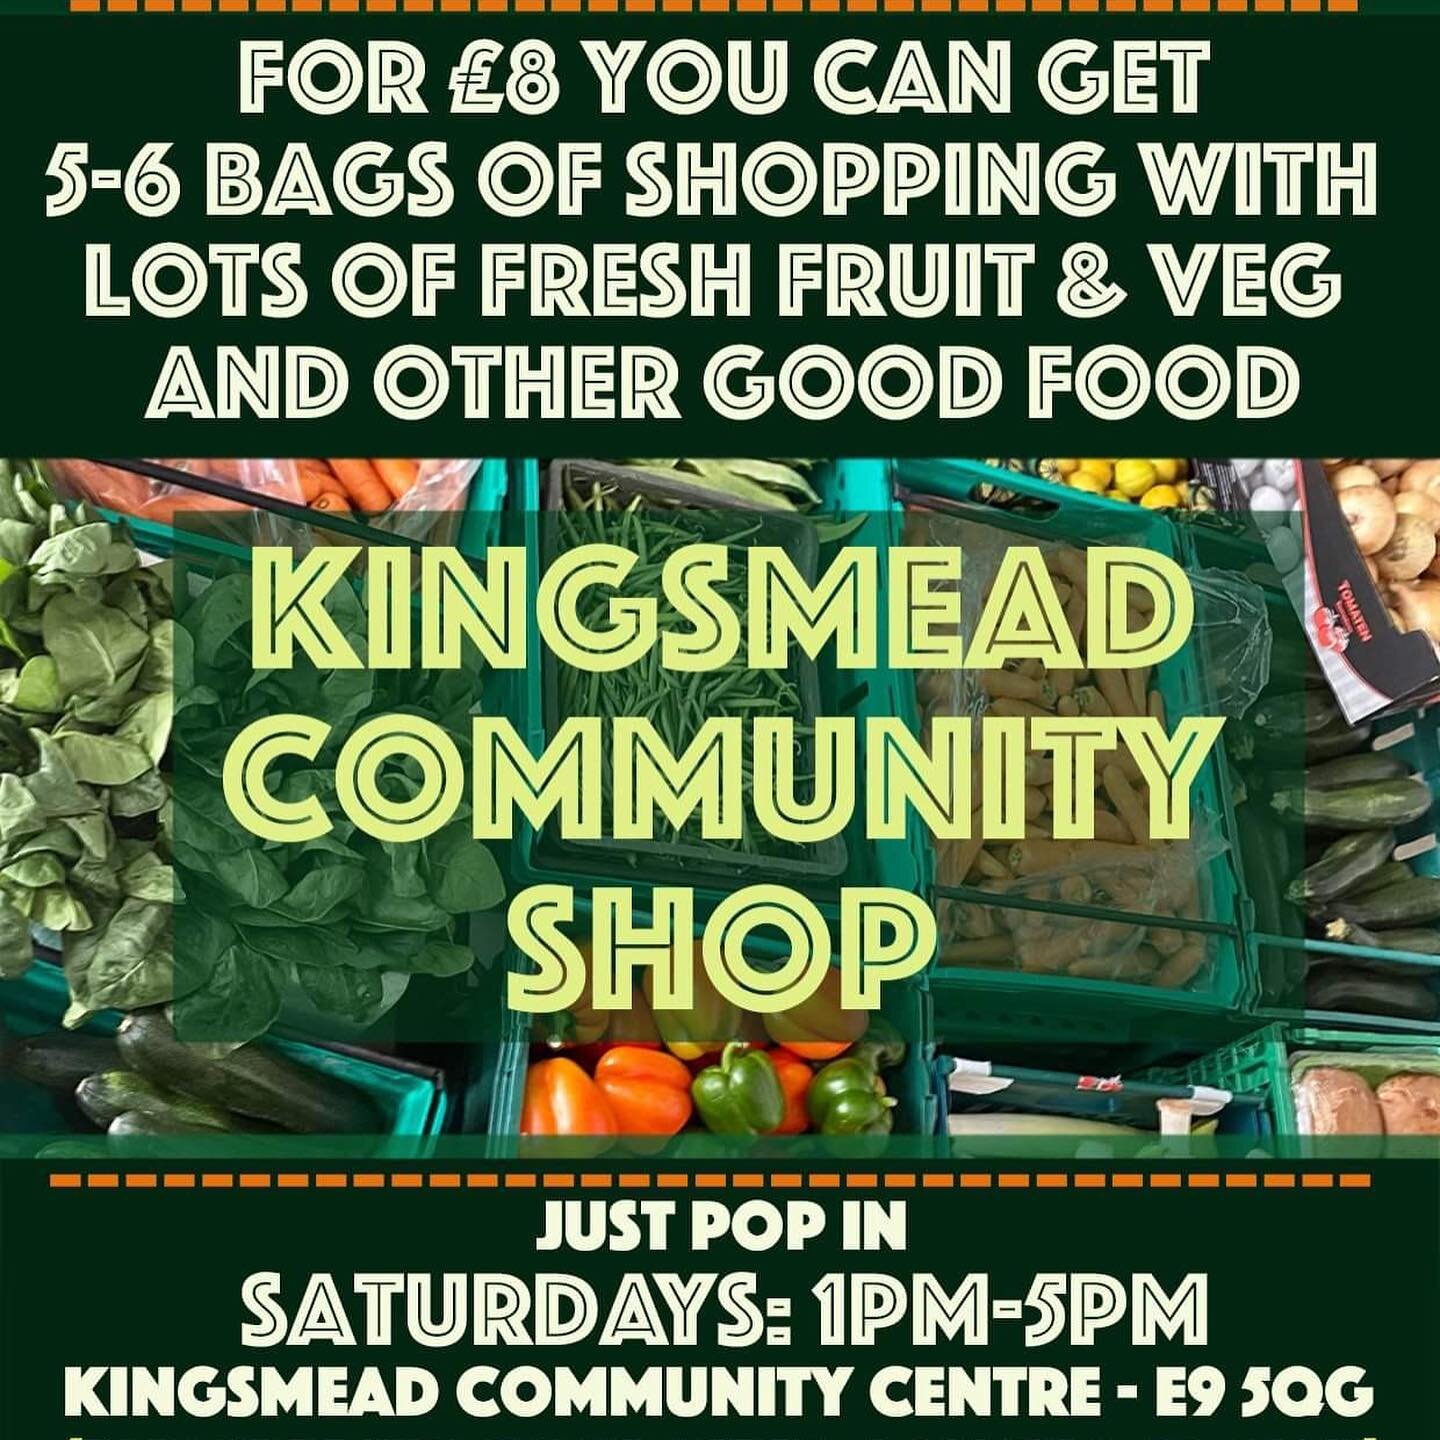 Please spread the word: Kingsmead Community Shop... Every Saturday E95QG... 1-5pm. By the people for the people. @madeupkitchen @rise.365 This week &pound;8 provides at least 6 bags of shopping: sweet potatoes, plantain, white potatoes, carrots, onio